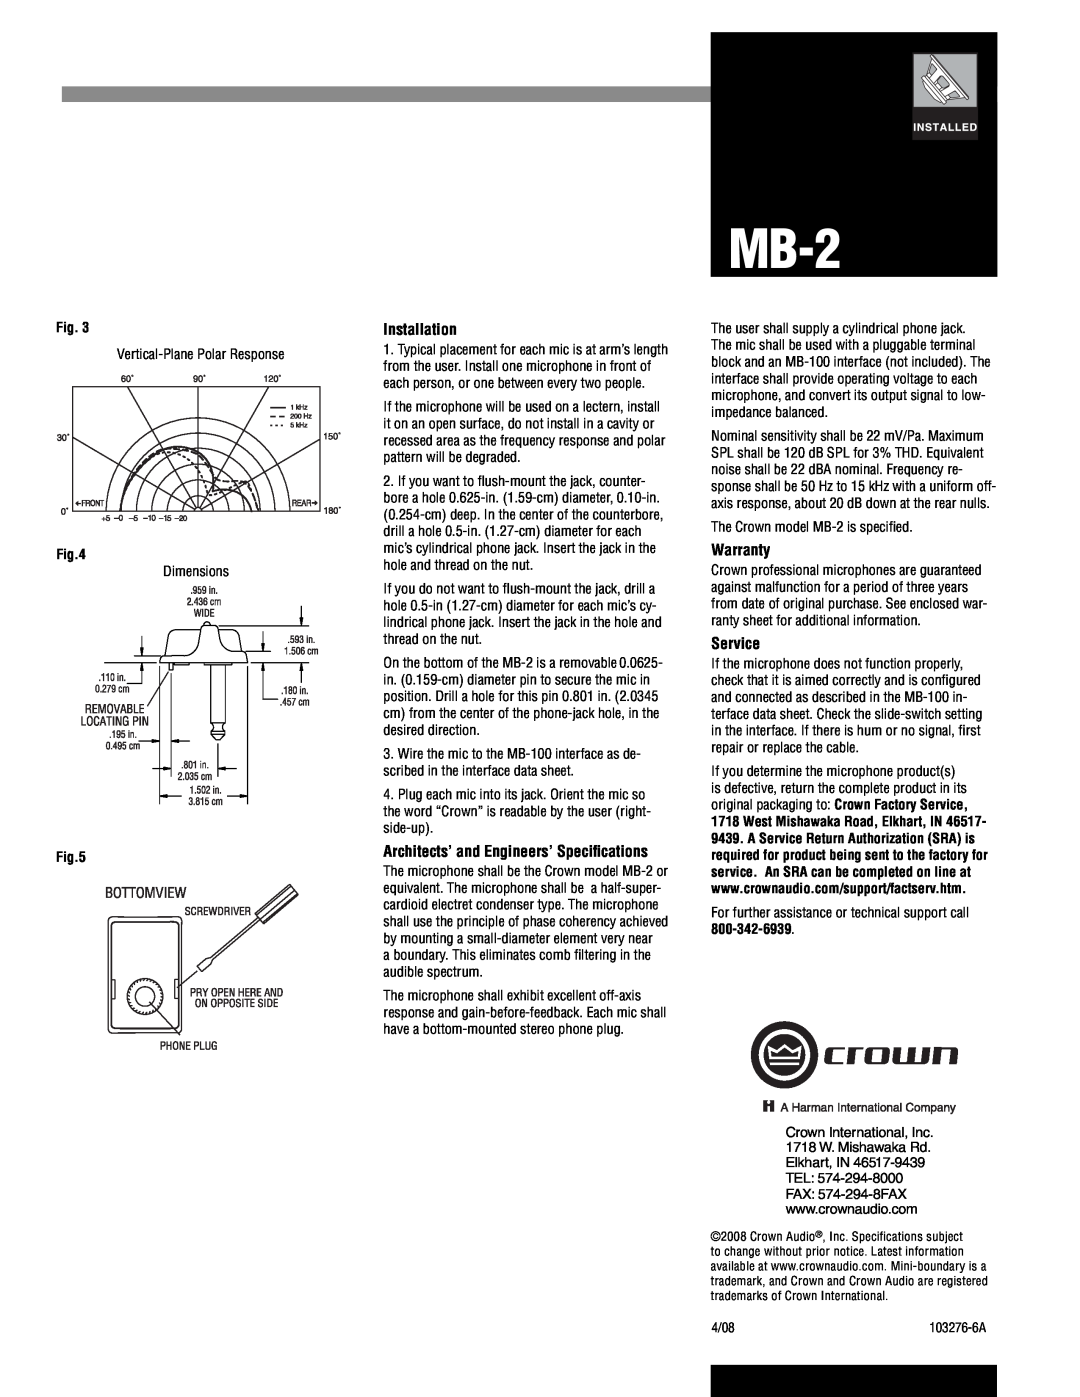 Crown Audio MB-2 specifications Installation, Architects’ and Engineers’ Speciﬁcations, Warranty, Service 